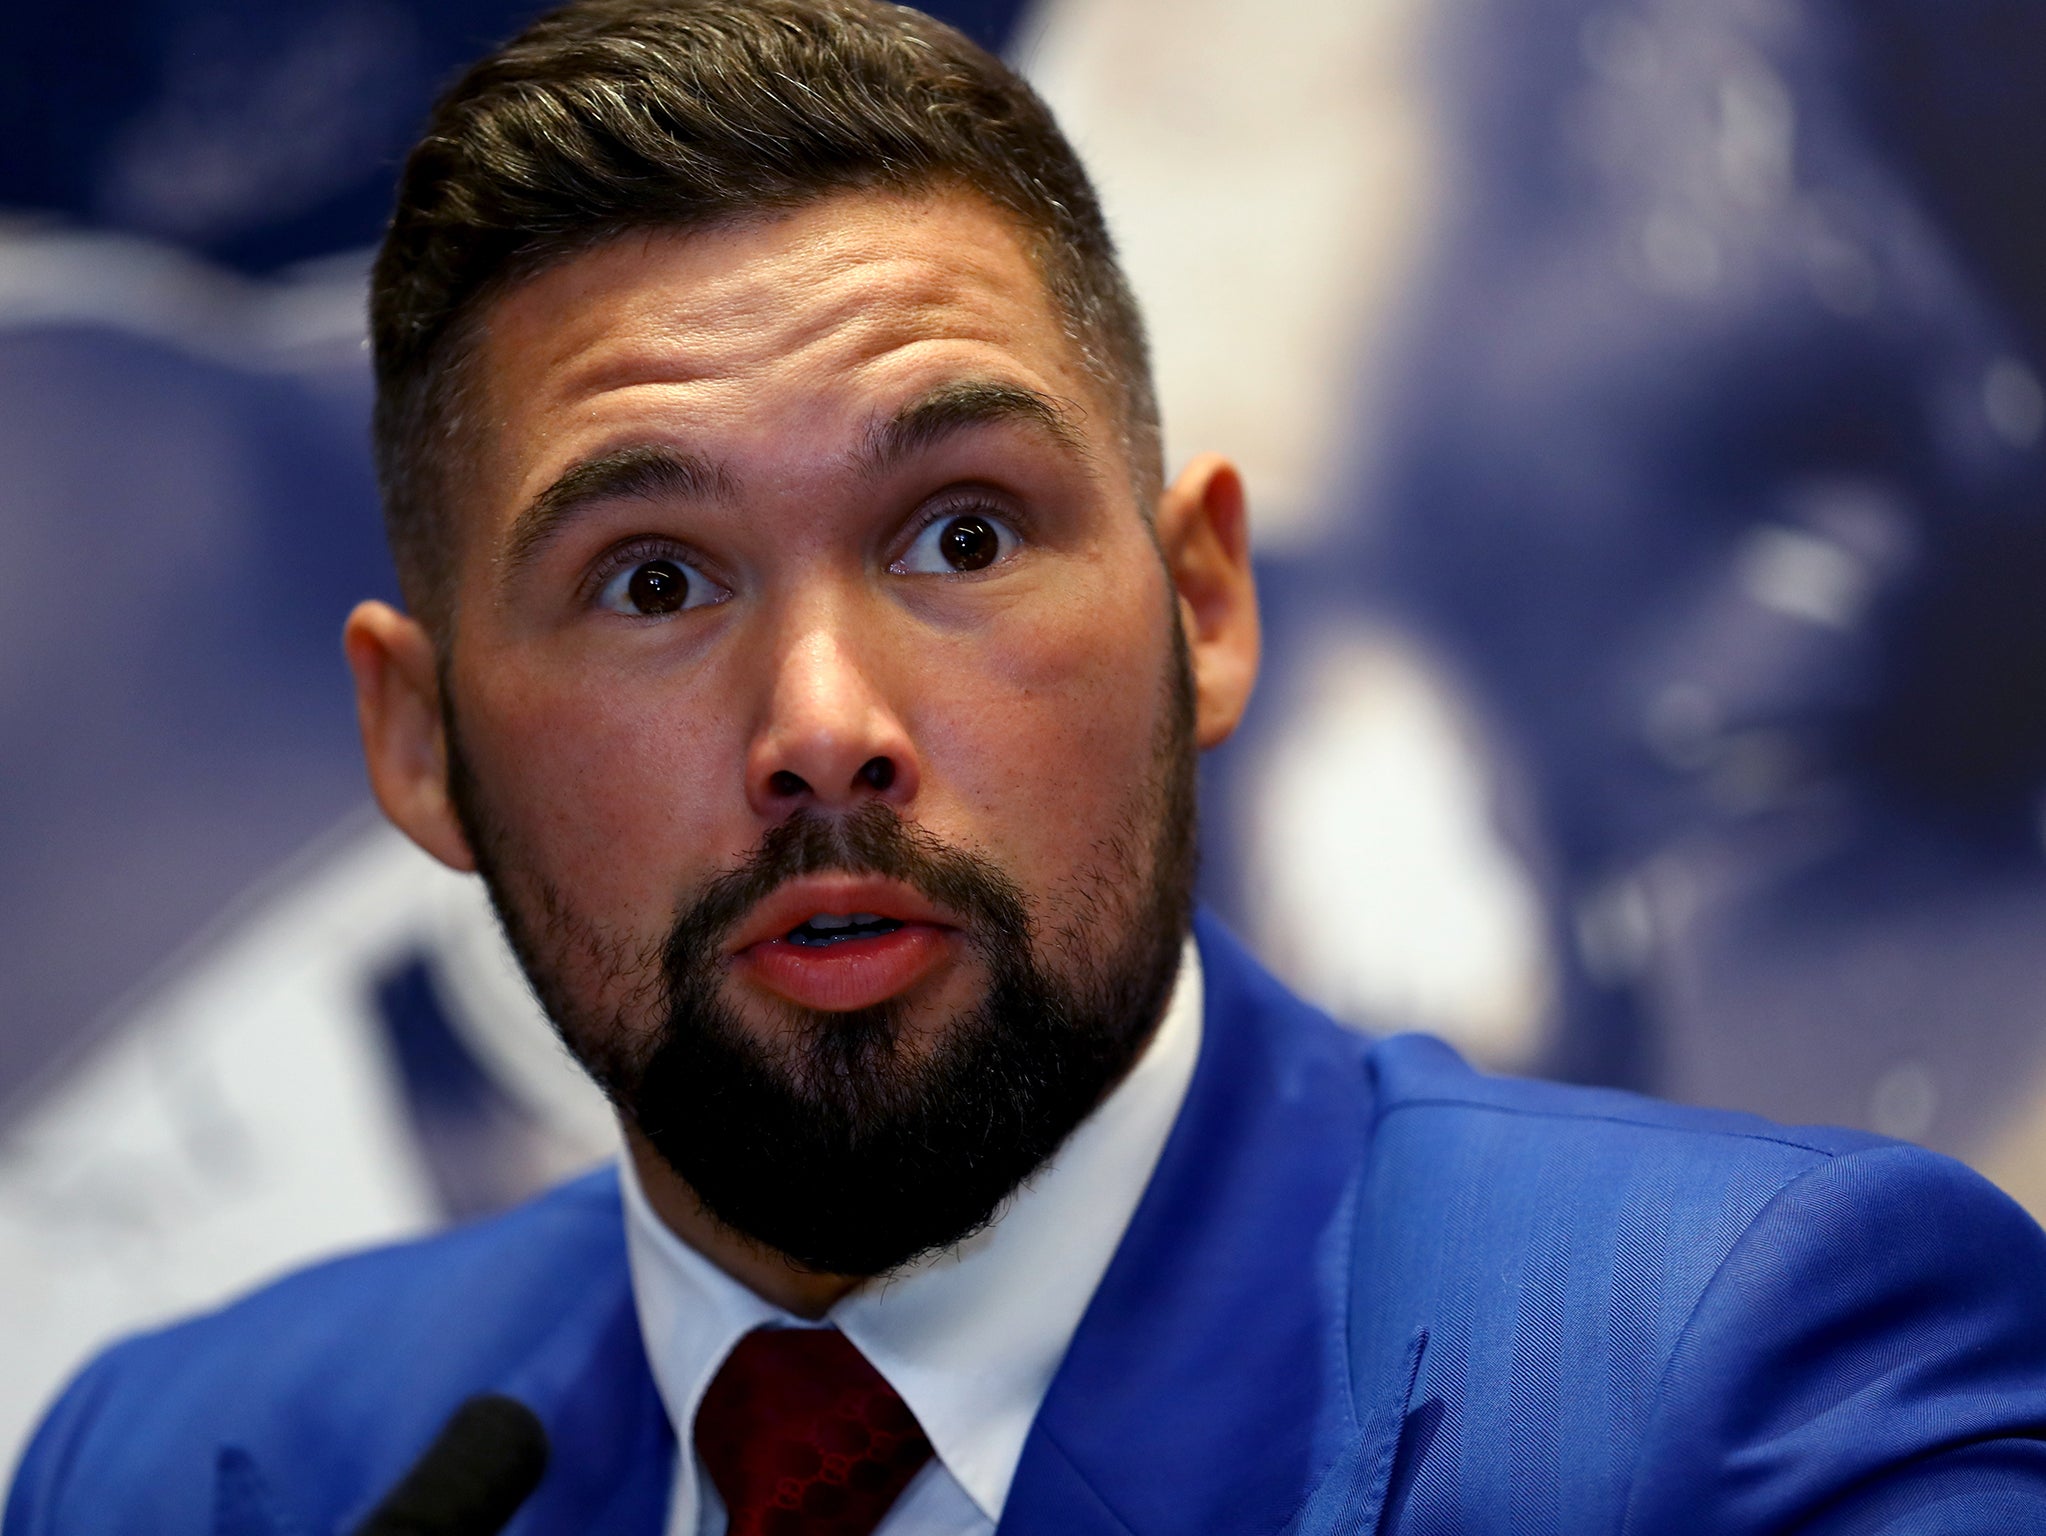 Tony Bellew will fight David Haye in a heavyweight rematch on May 5